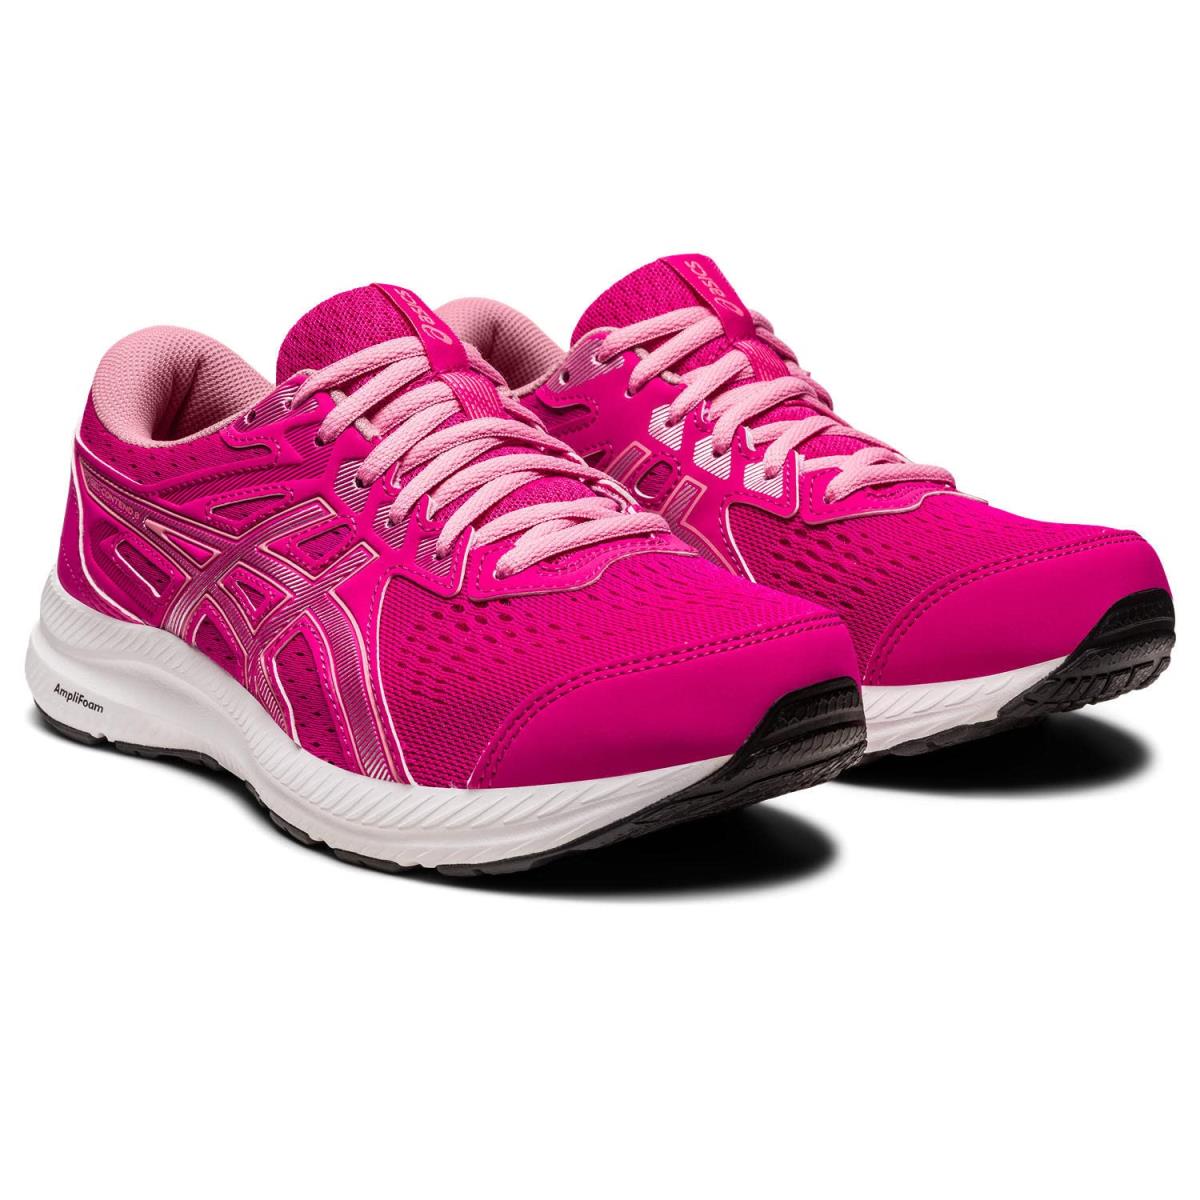 Man`s Sneakers Athletic Shoes Asics Gel-contend 8 Pink Rave/Pure Silver